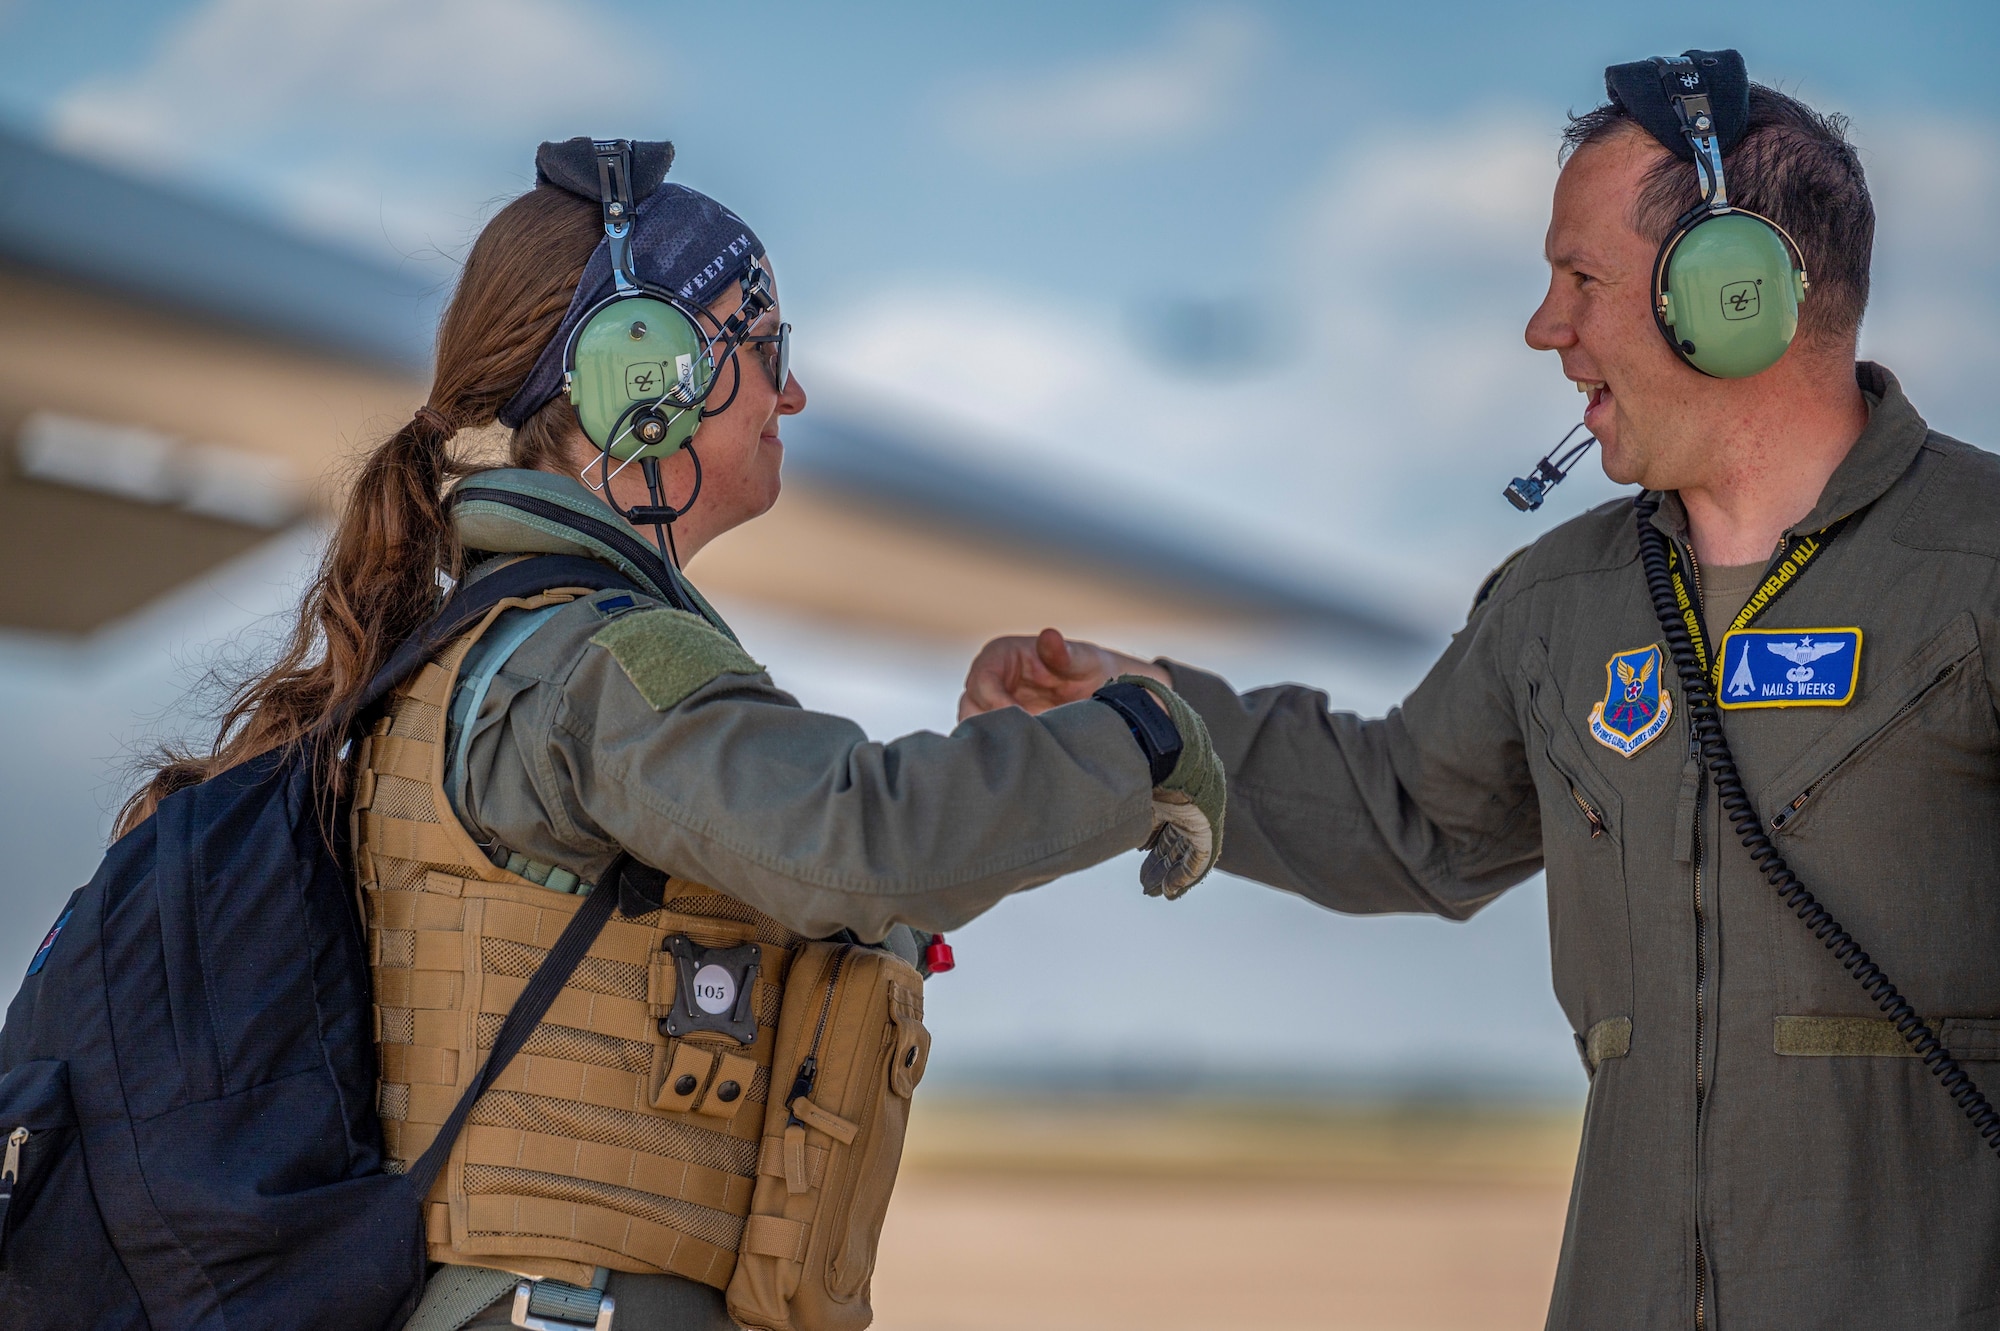 Capt. Erika Tucker, 9th Bomb Squadron pilot, greets Capt. Dustin Weeks, 7th Operations Group executive officer, after conducting pre-flight checks on a B-1B Lancer at Dyess Air Force Base, Texas, June 30, 2022. The U.S. Department of Defense builds partnerships through focused activities such as senior leader engagements, security force assistance, and cooperation, and multi-national exercises. (U.S. Air Force photo by Senior Airman Colin Hollowell)